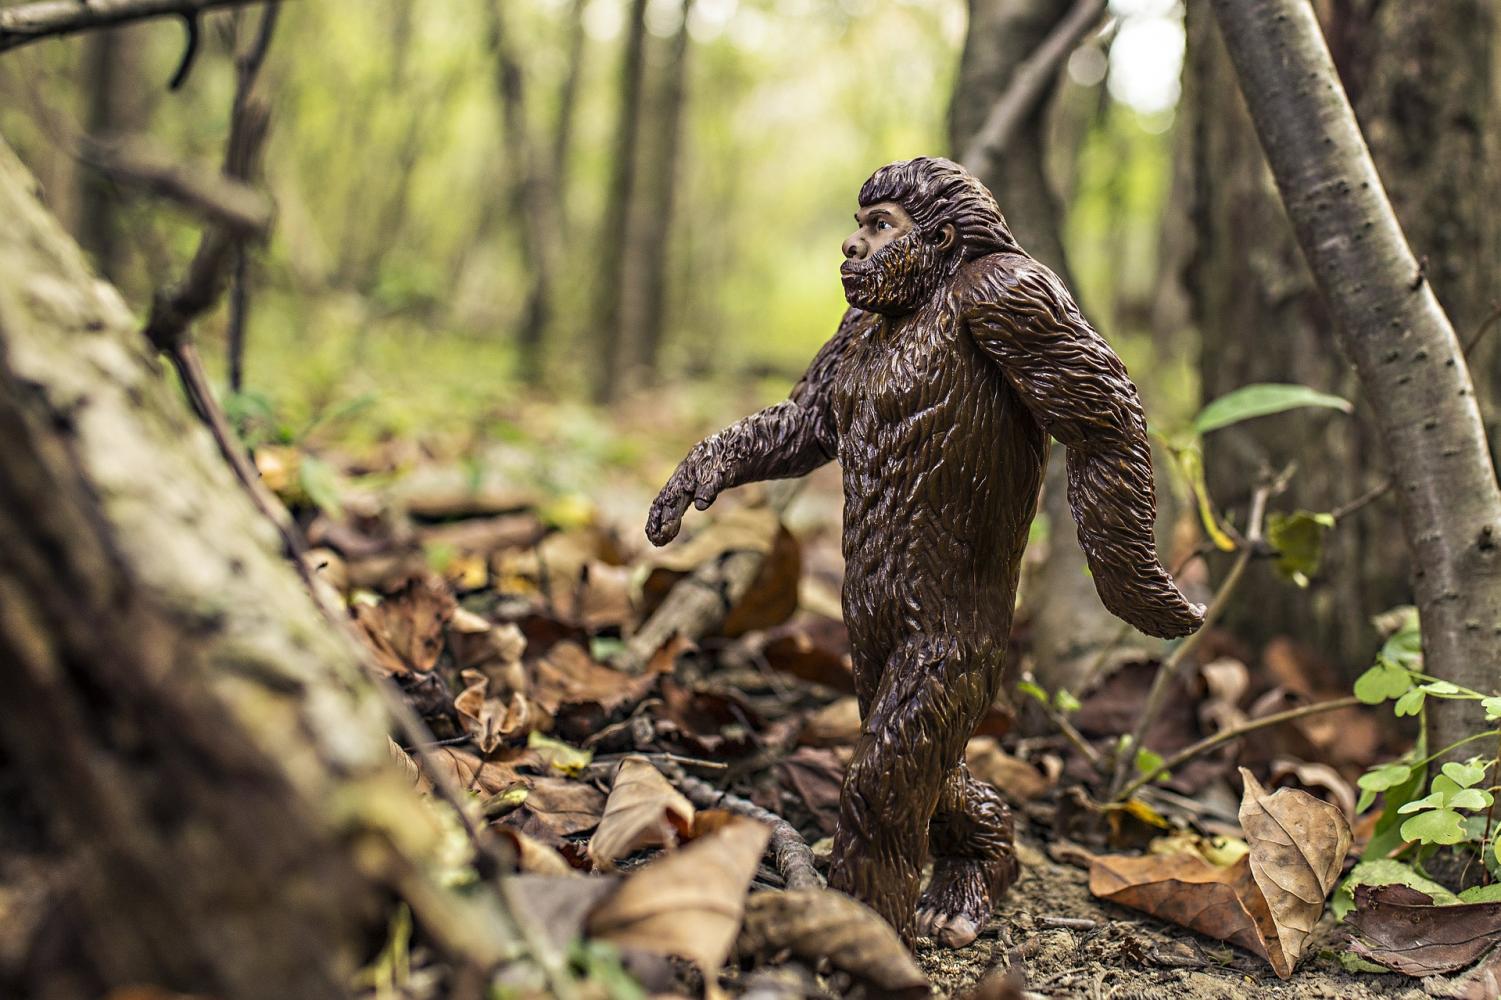 After the incident Bigfoot has become a running gag in the Phillips family. The BFRO continues to investigate the area where it happened.